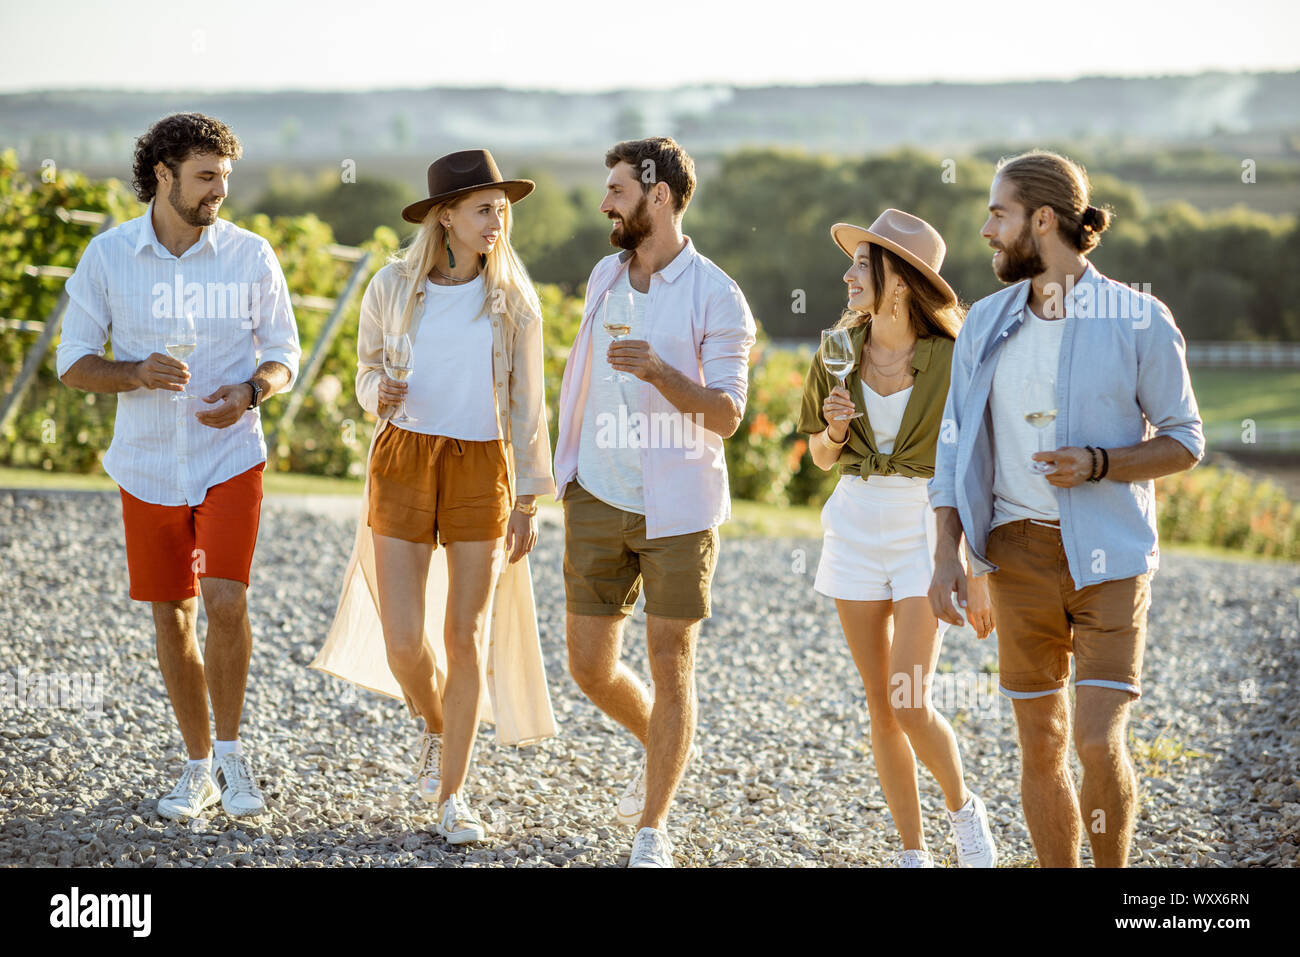 Group of young friends dressed casually hanging out together, walking with wine glasses on the vineyard on a sunny day Stock Photo